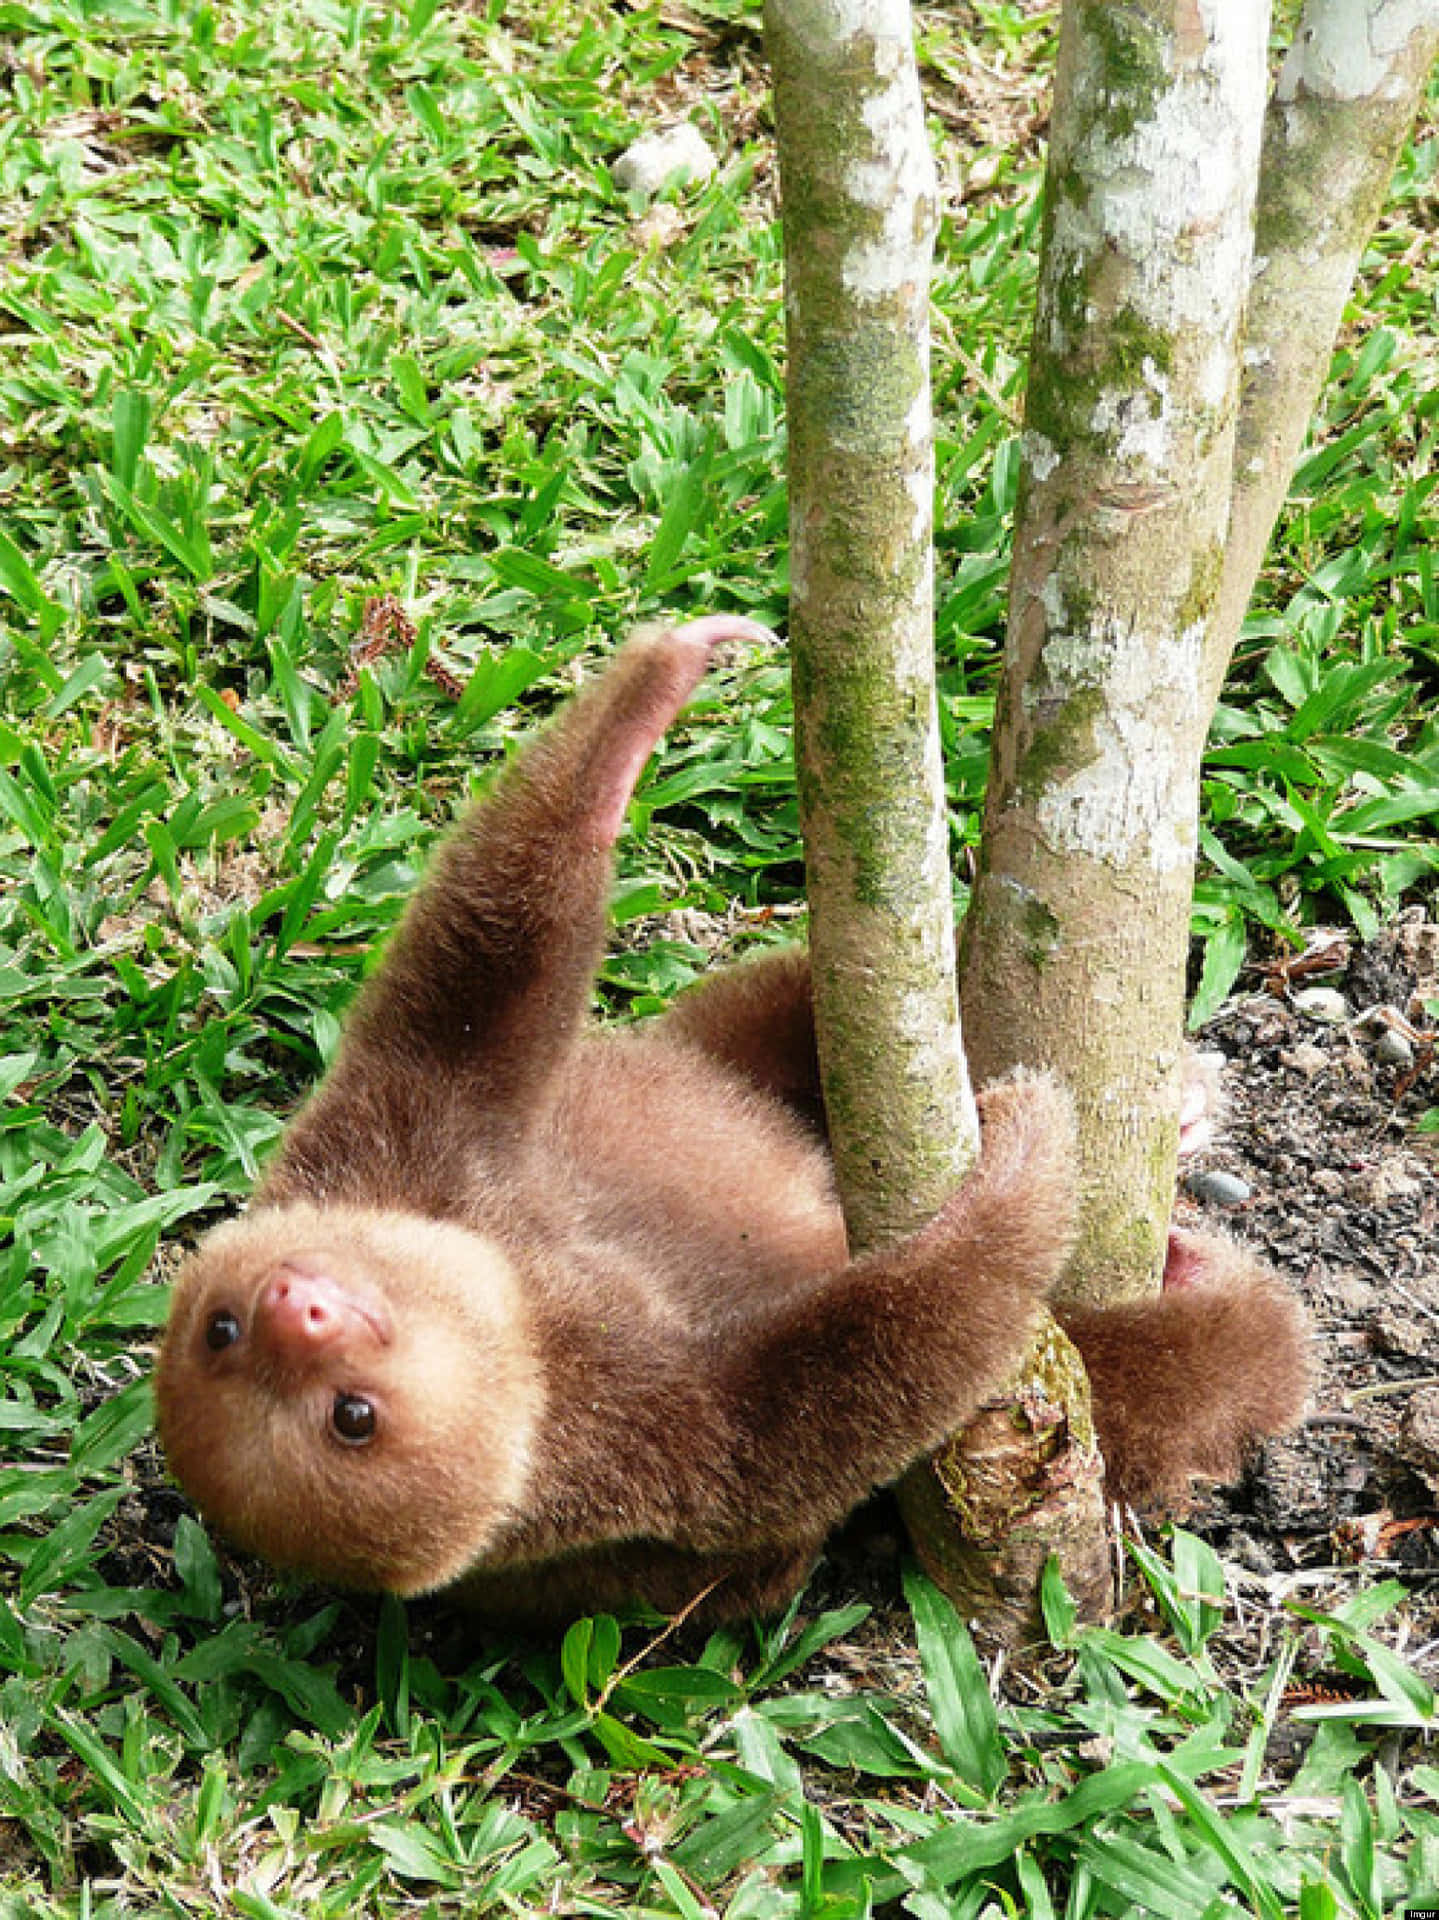 "An Adorable Baby Sloth Gazing Into The Distance"